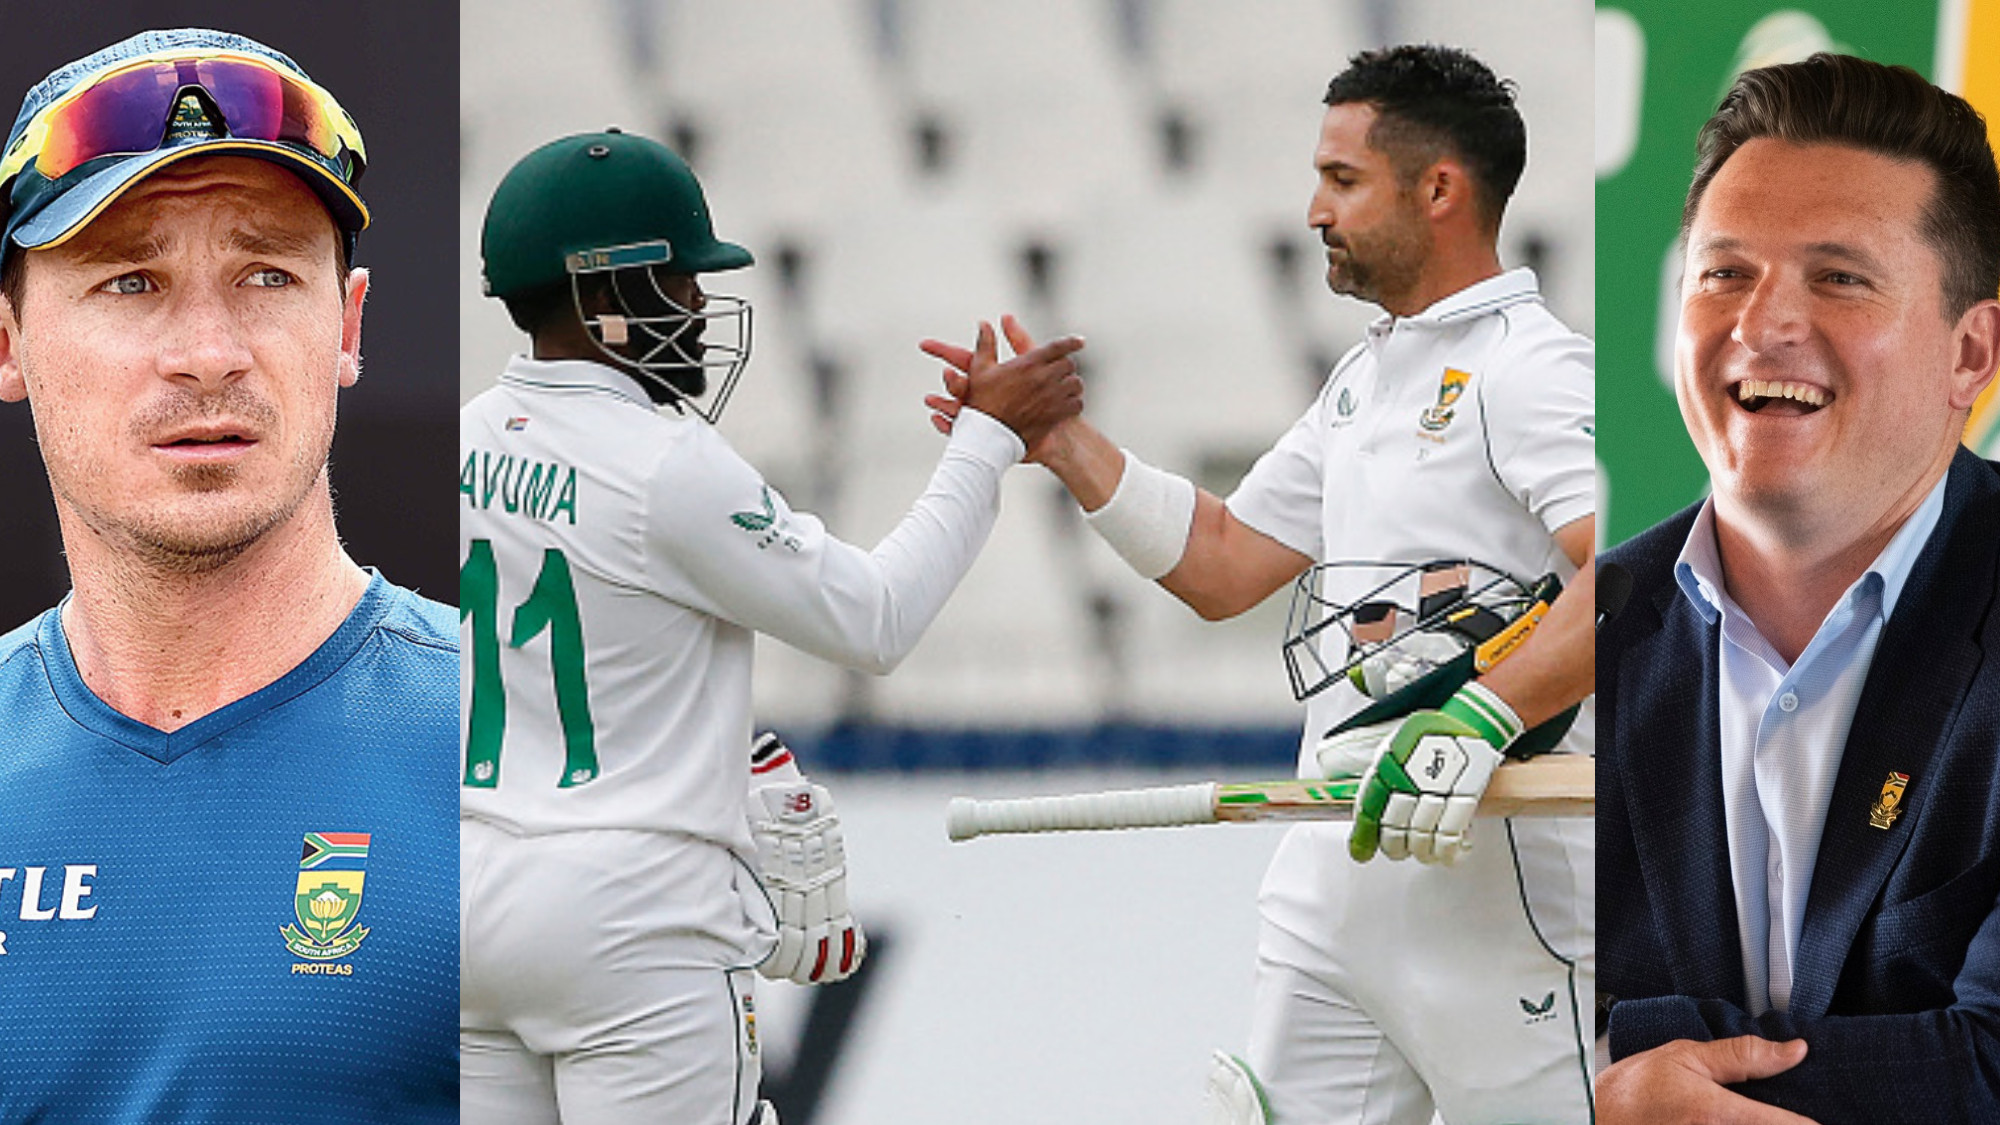 SA v IND 2021-22: Cricket fraternity lauds Dean Elgar’s 96* as South Africa beats India by 7 wickets; levels series 1-1